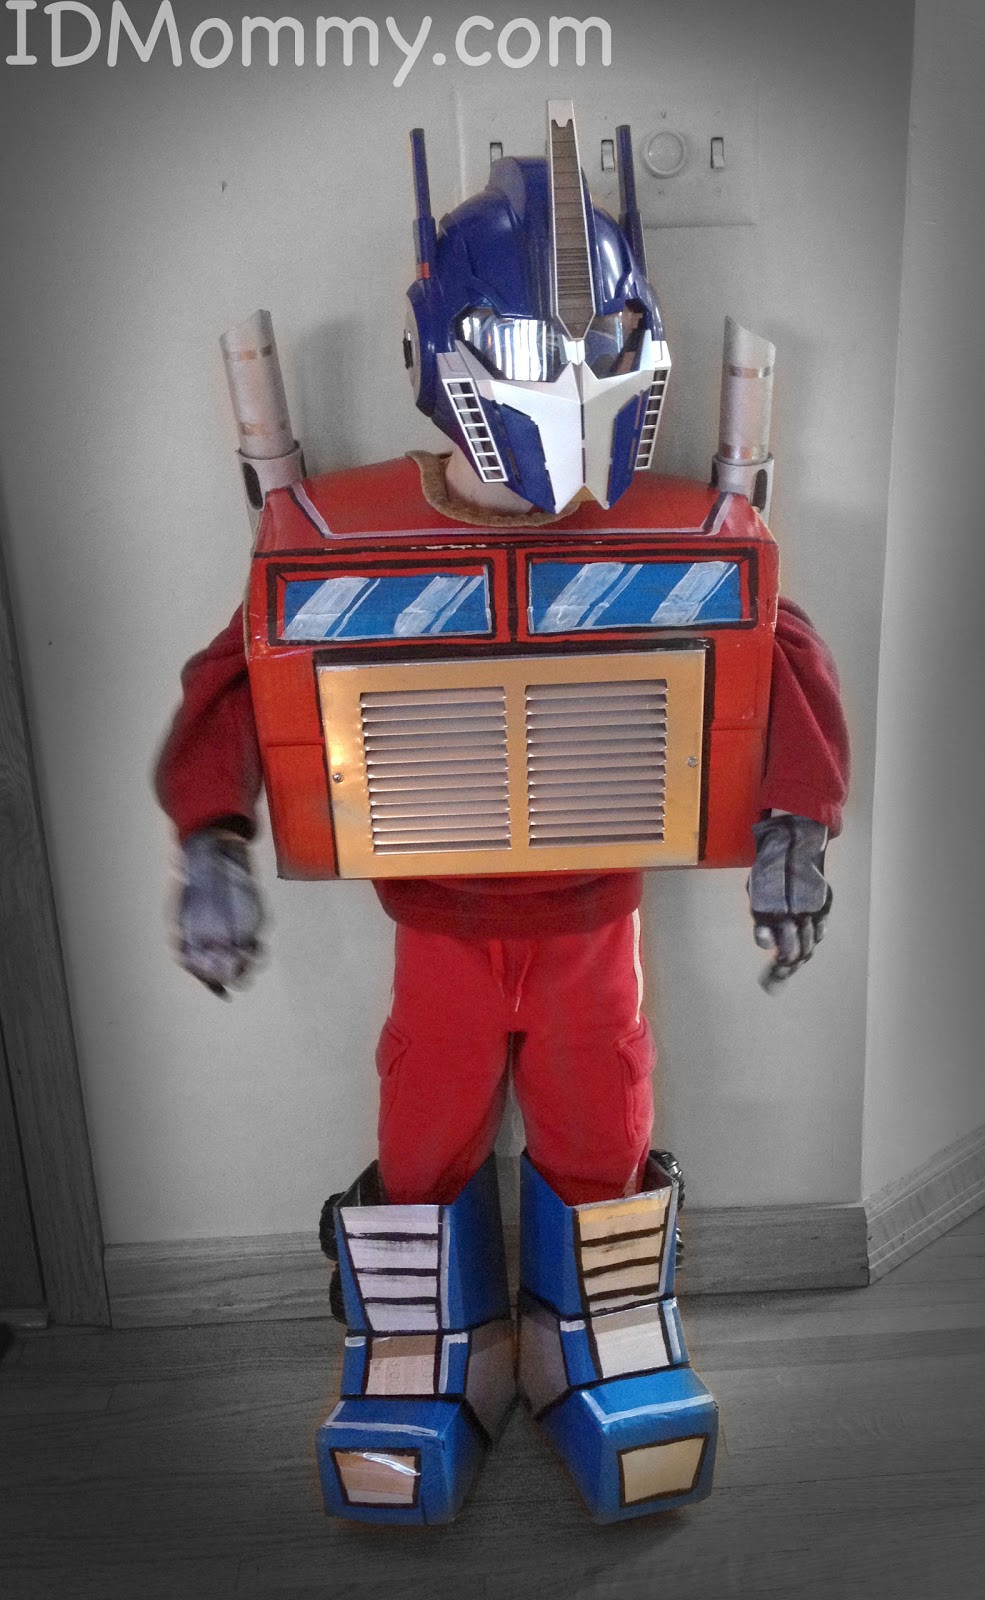 Optimus Prime Costume DIY
 ID Mommy DIY Mickey Mouse and Optimus Prime Transformer